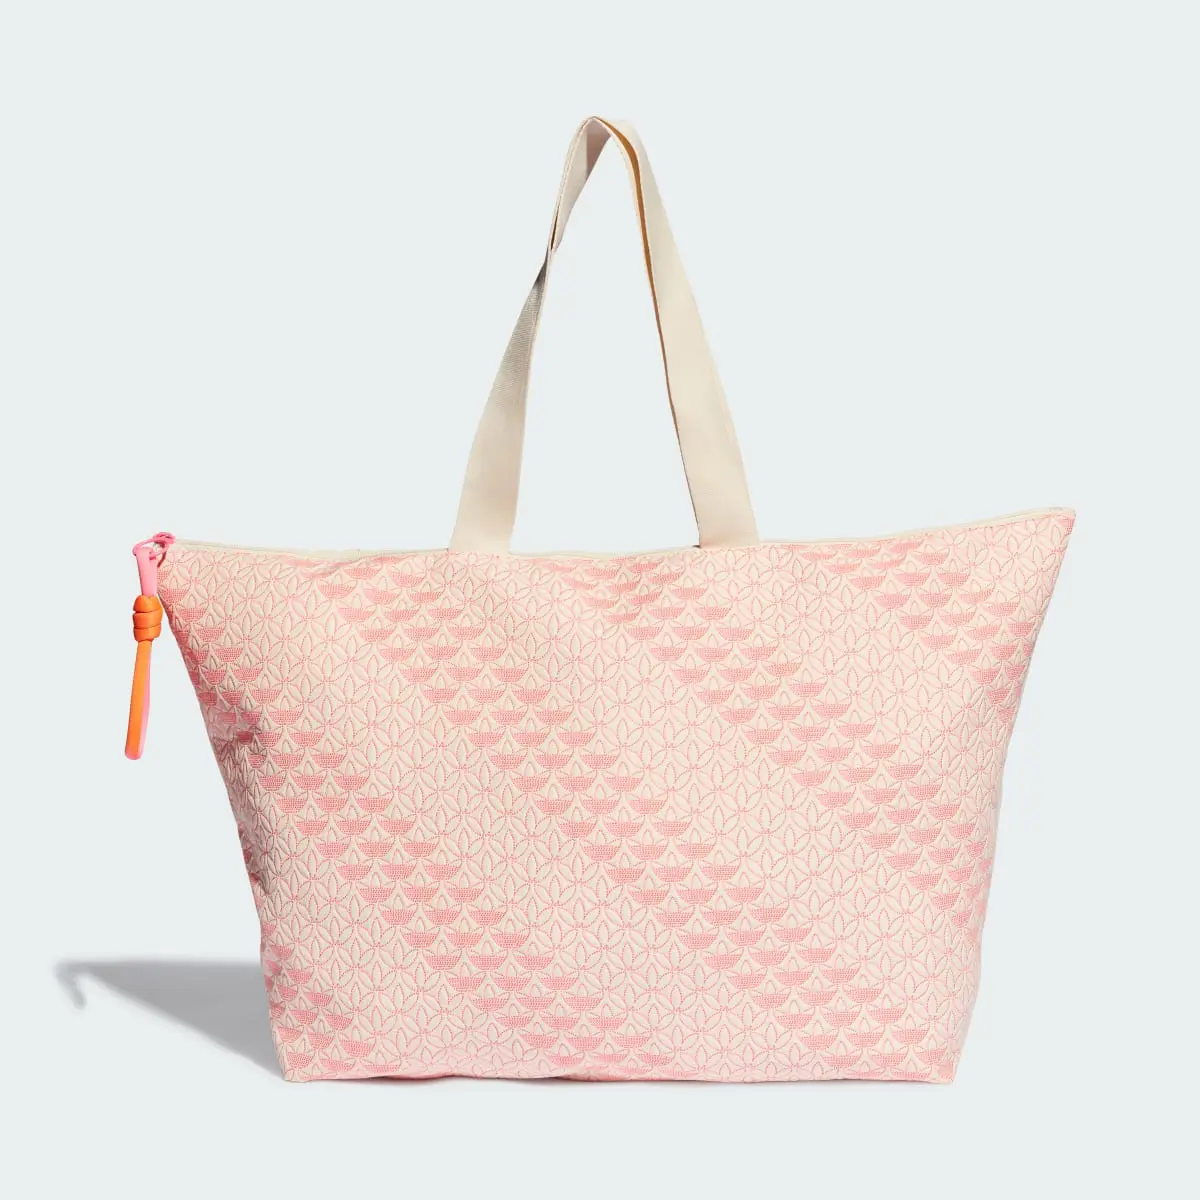 Adidas Bolso Shopper Quilted Trefoil. 2